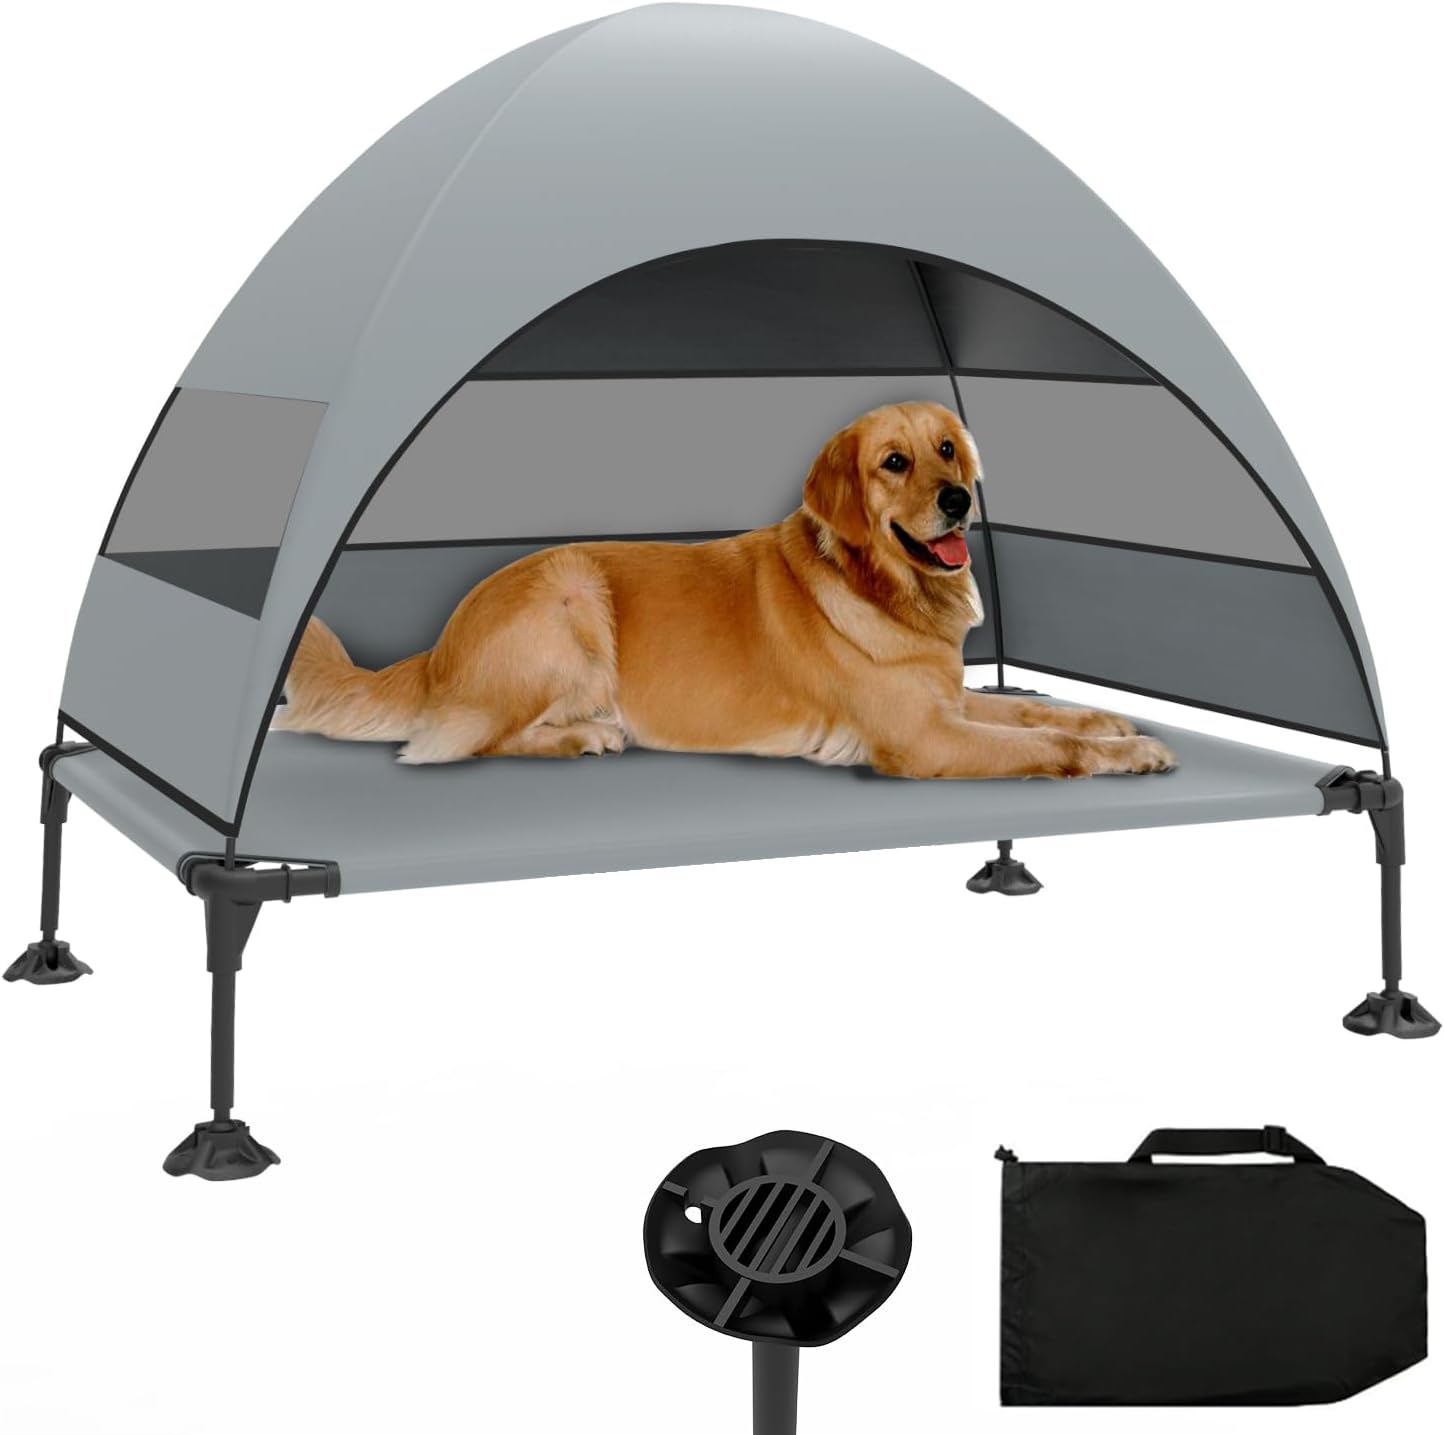 Image of Derkriy Outdoor Dog Bed with Canopy | dog hiking gear